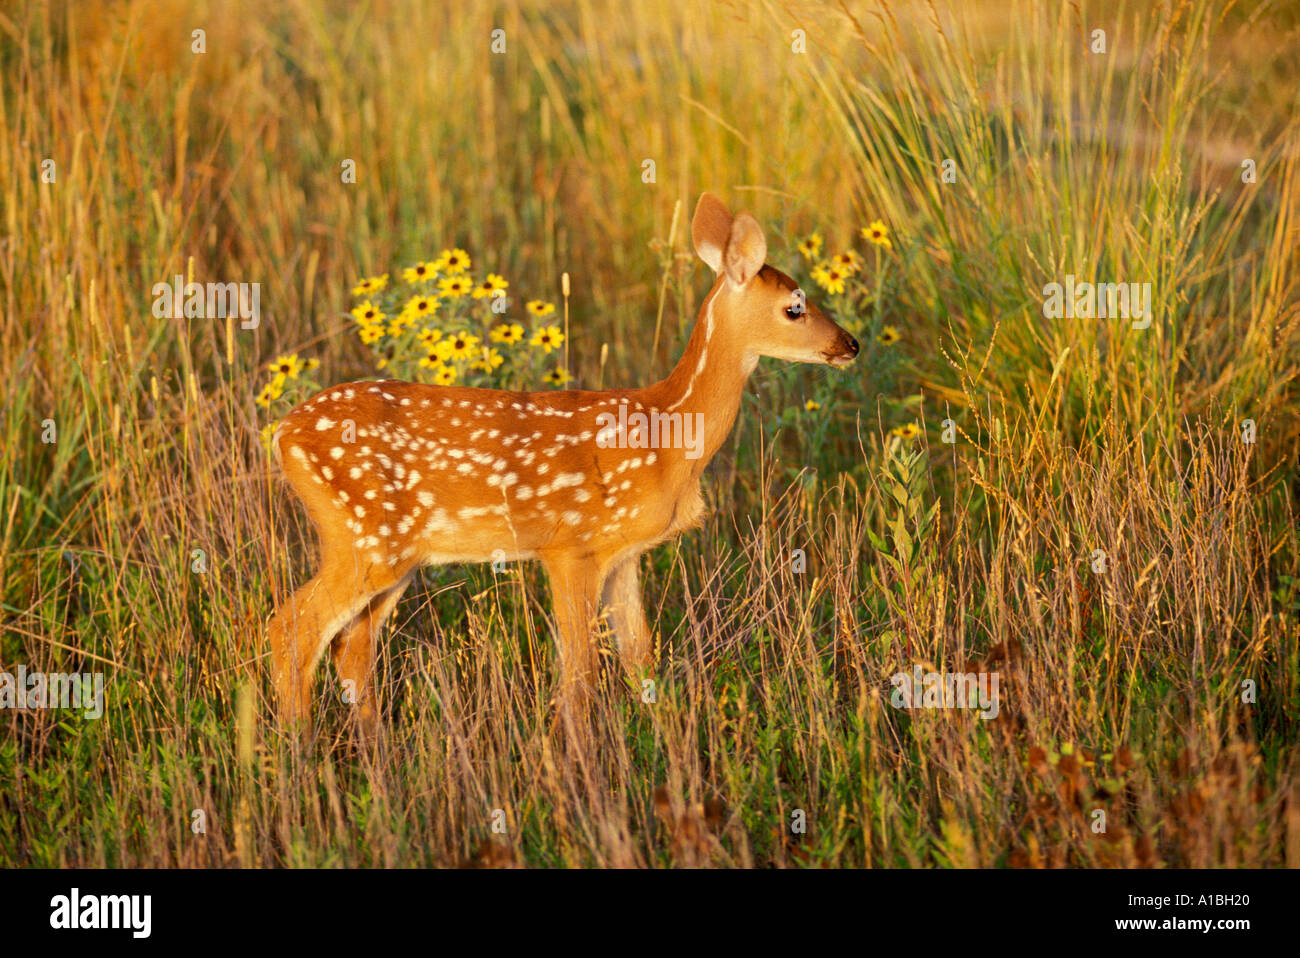 Whitetail fawn (Ododcolleus virginianus) stands in tall weeds in early morning light, Missouri USA Stock Photo